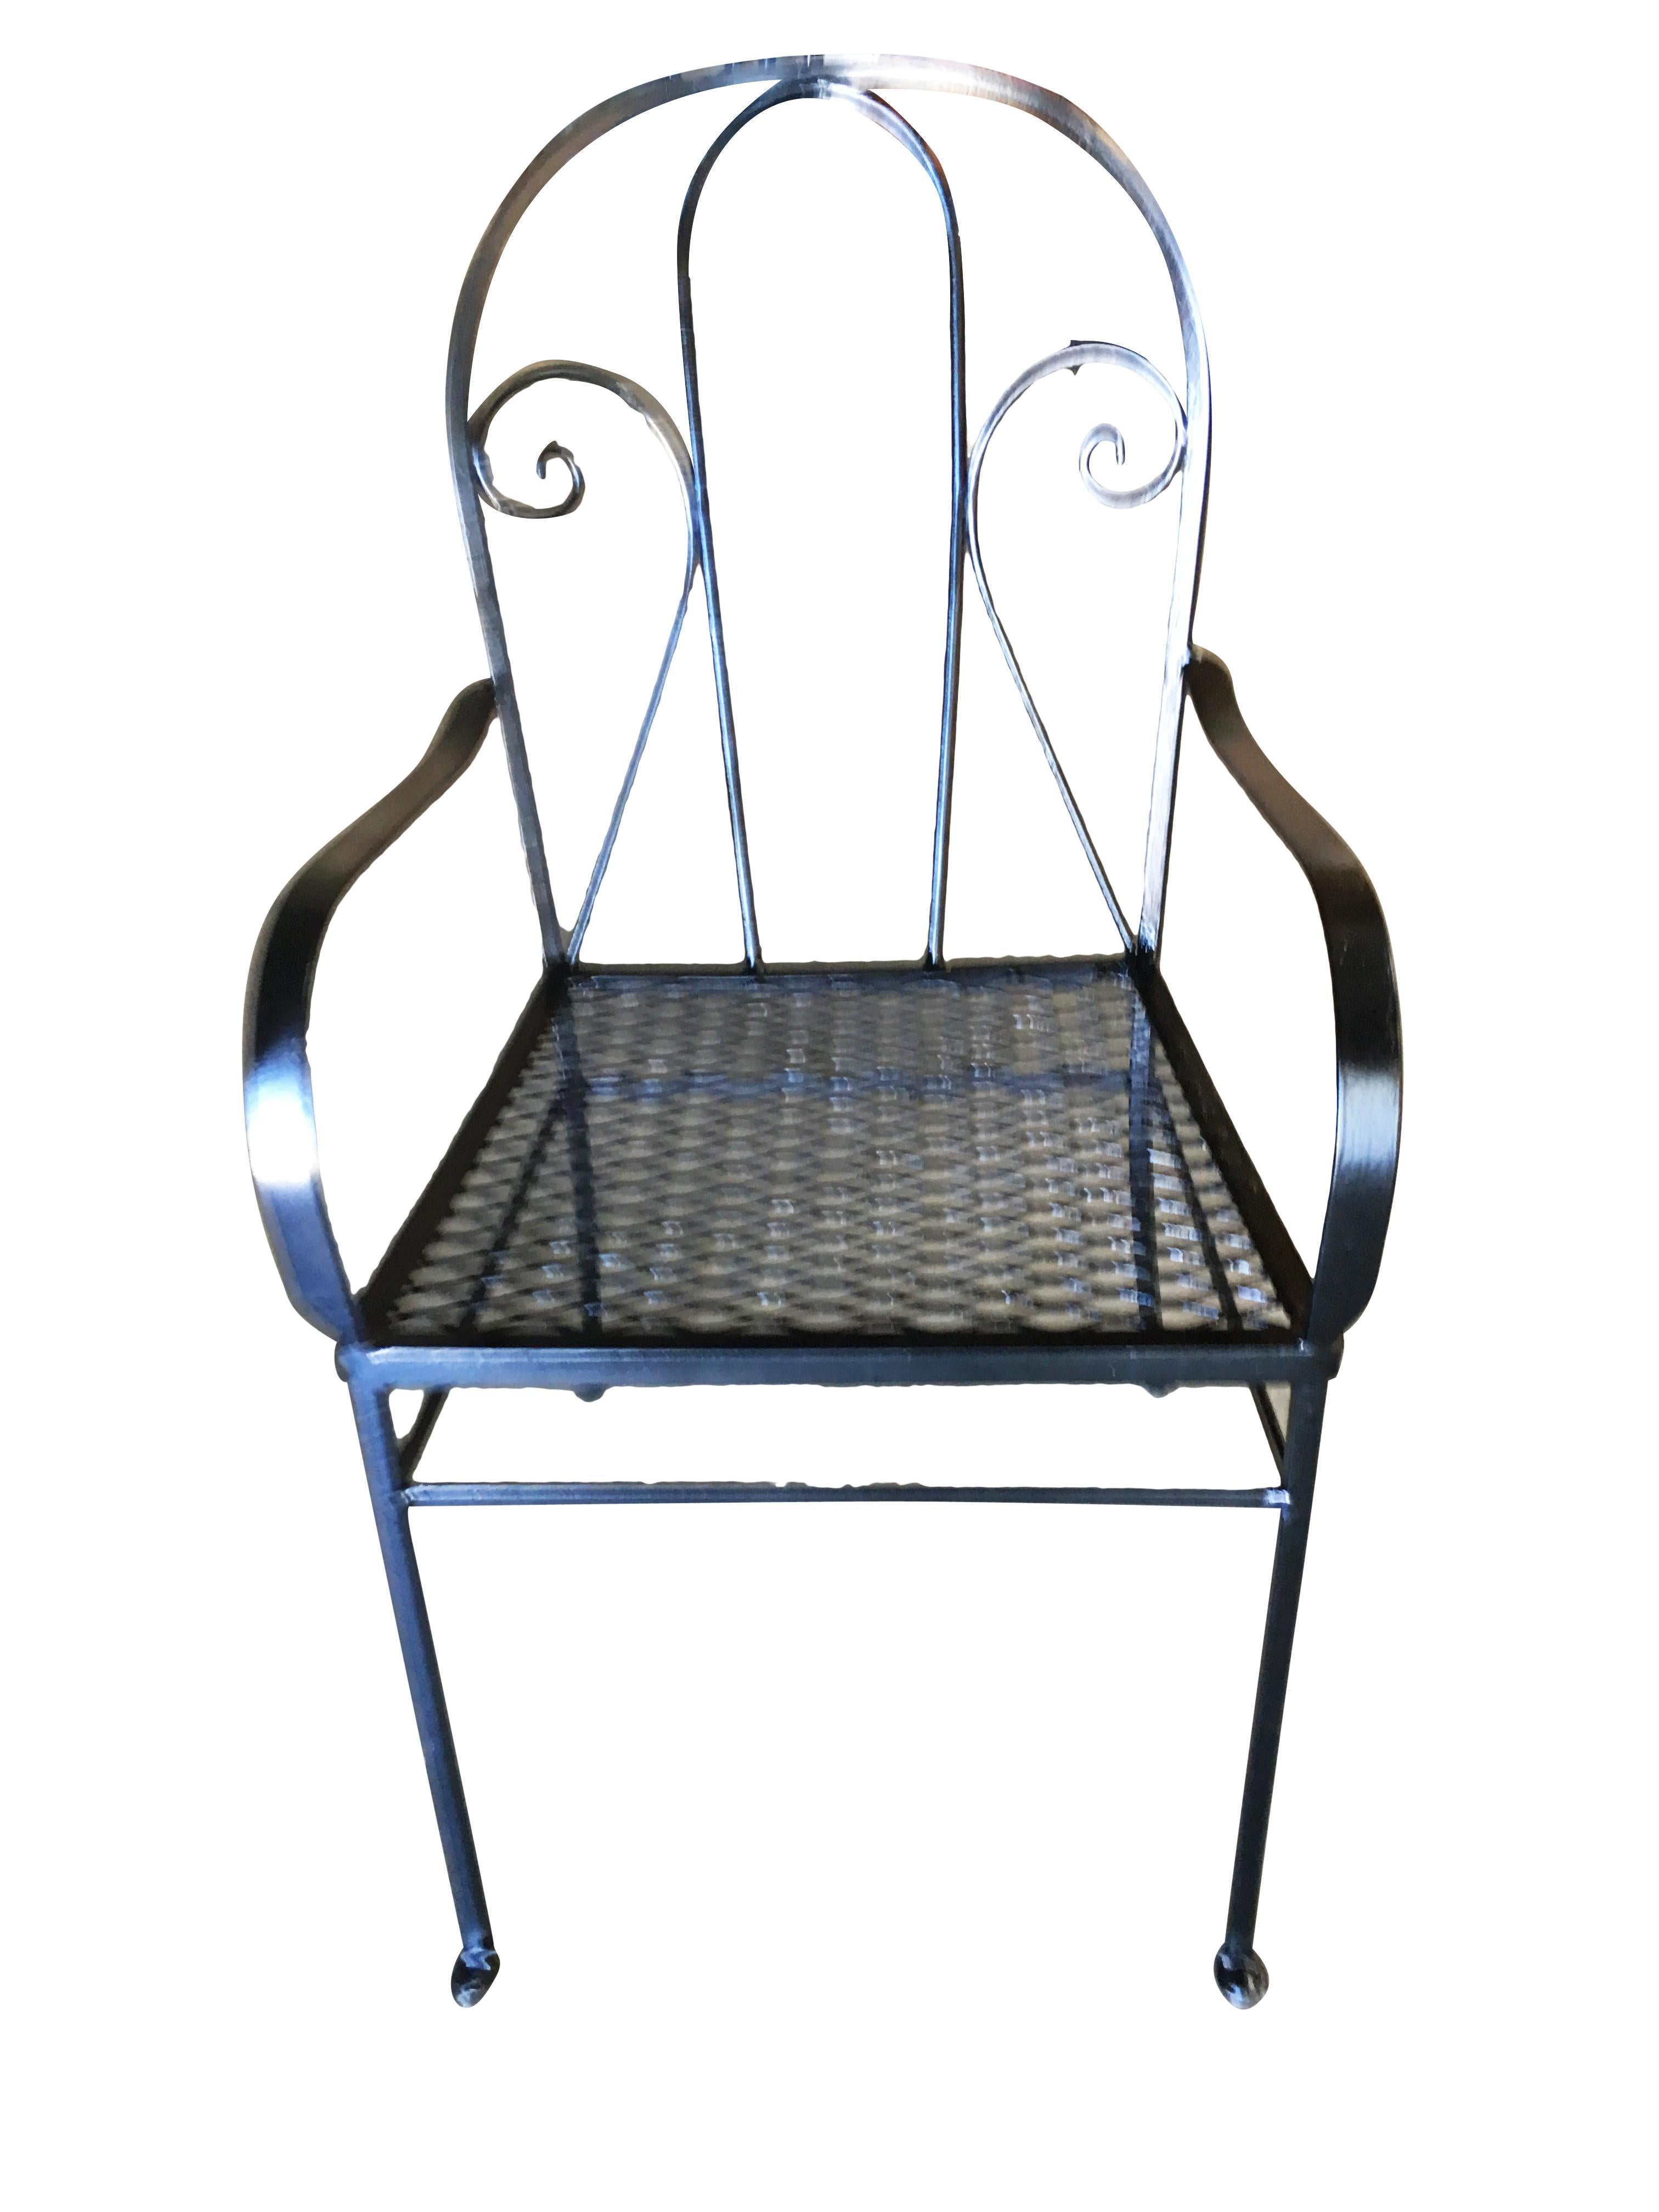 Mid-century Iron Bistro outdoor patio chair set that includes two chairs with a distinct scrolling backrest. This set was constructed with solid-core iron castings and is finished in black with a mesh seat. Similar to the patio sets found in Italy